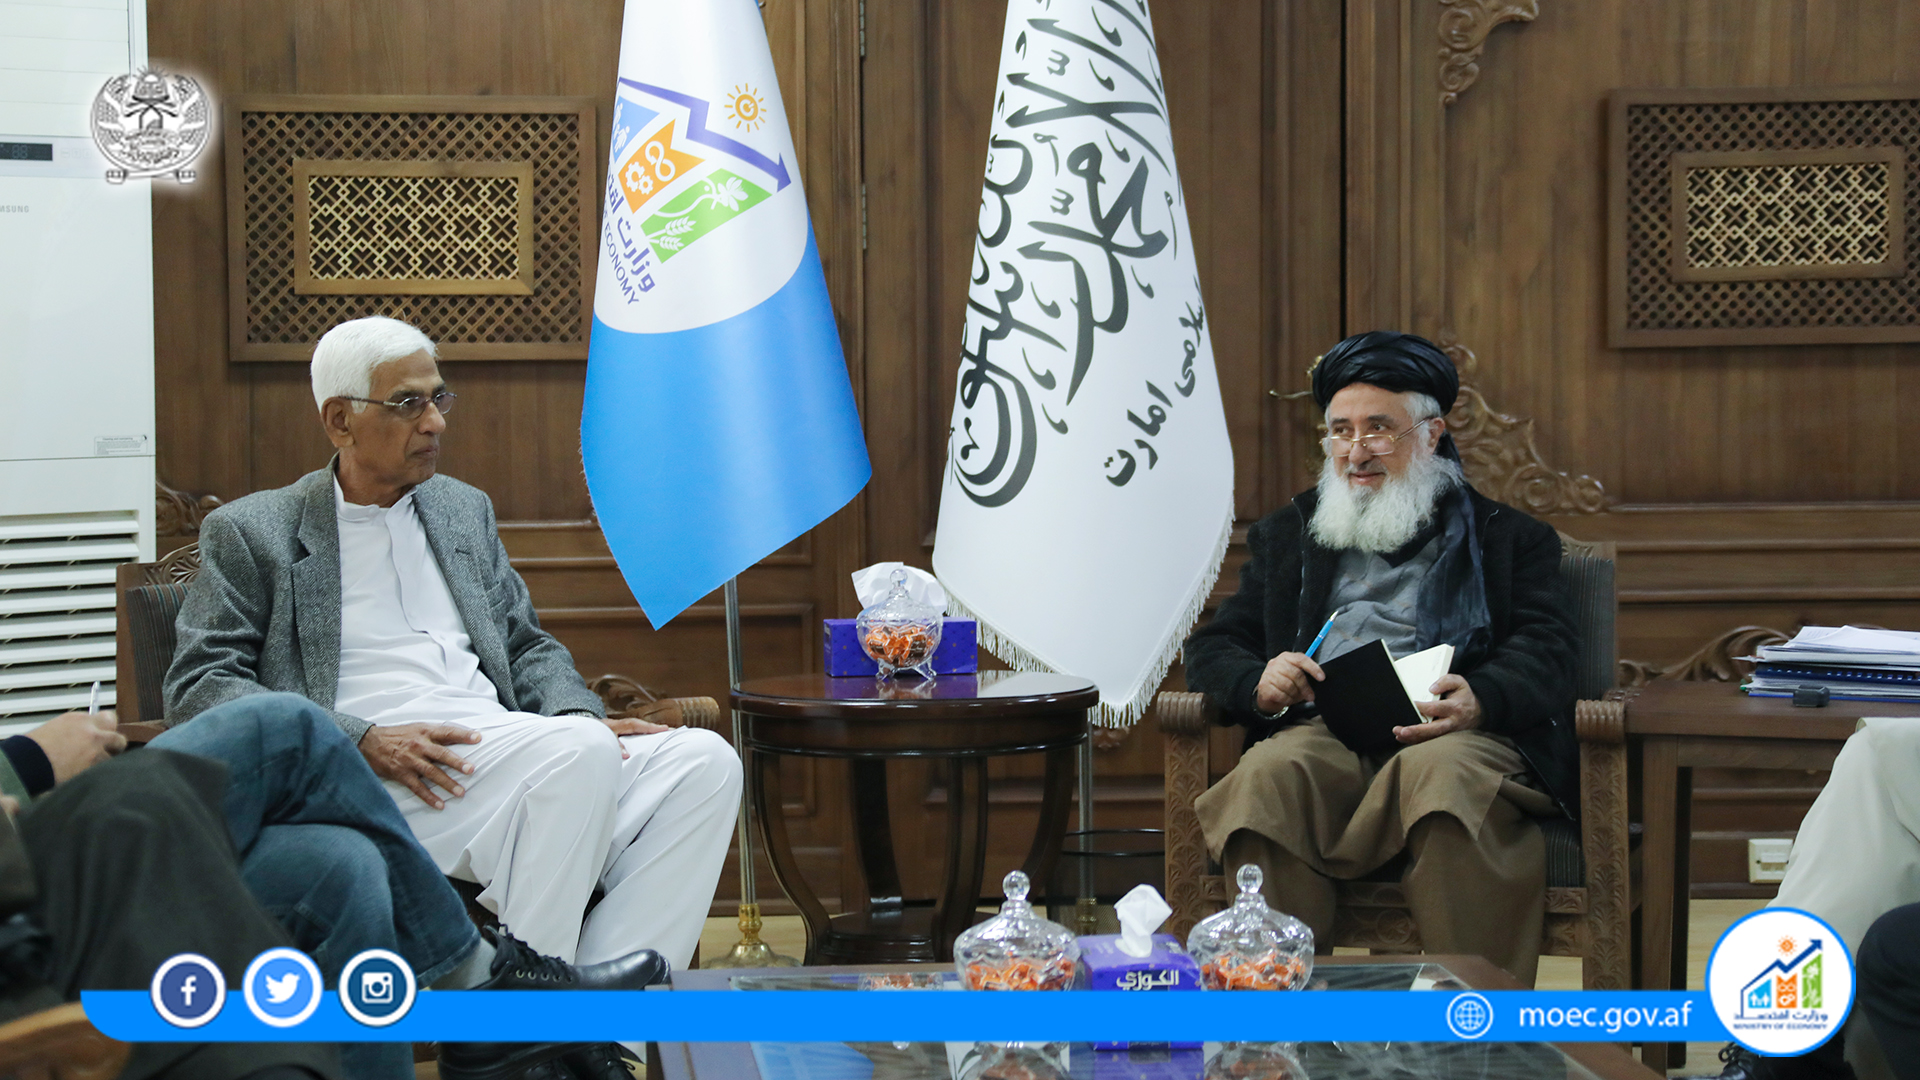 Alhaj Qari Din Mohammad Hanif, Acting Minister of Economy, met with the special representative of the Agha Khan Foundation